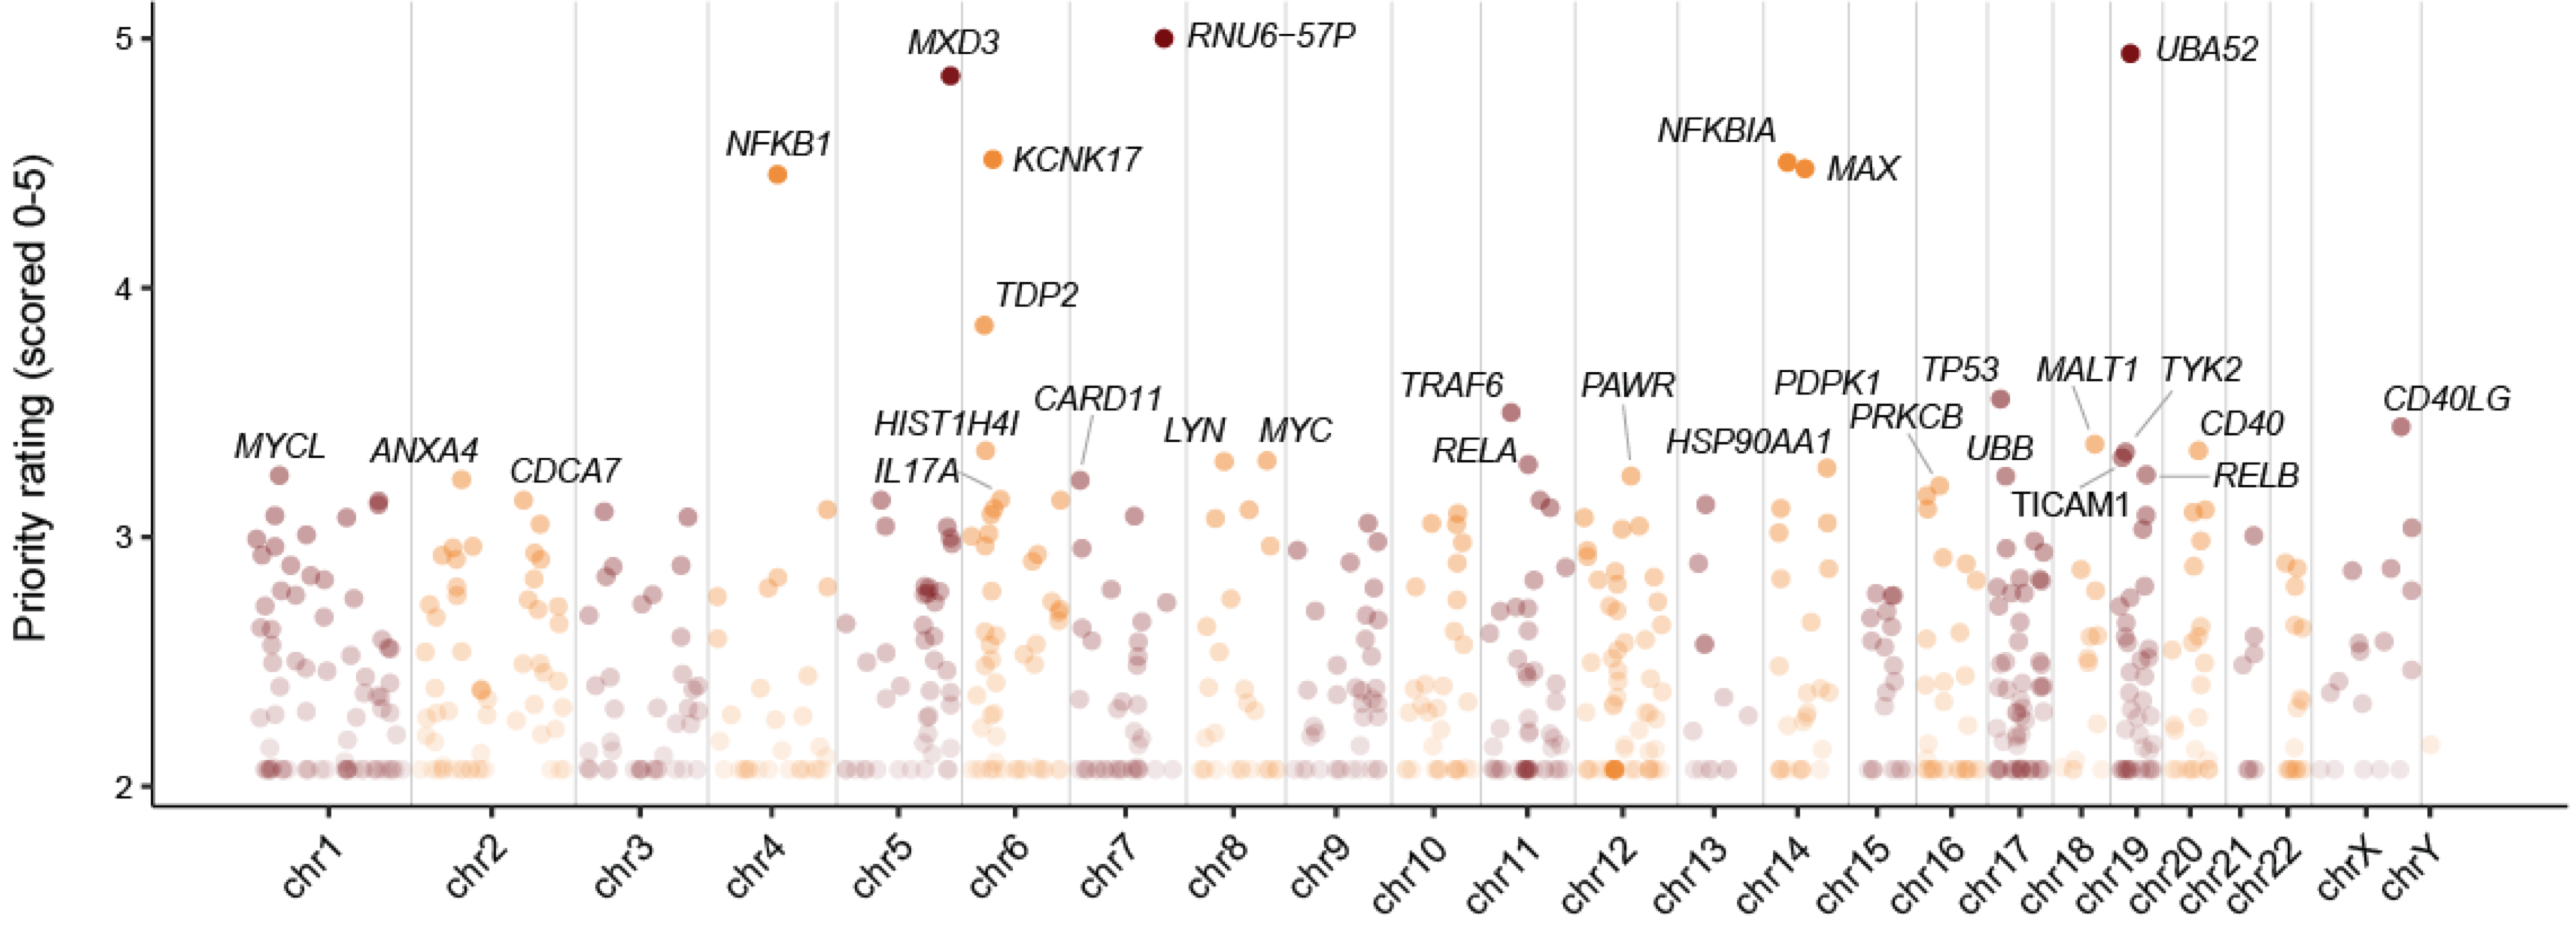 Manhattan plot illustrates priority rating (y-axis) for prioritised target genes (color-coded by chromosomes; x-axis), with top 30 genes named.